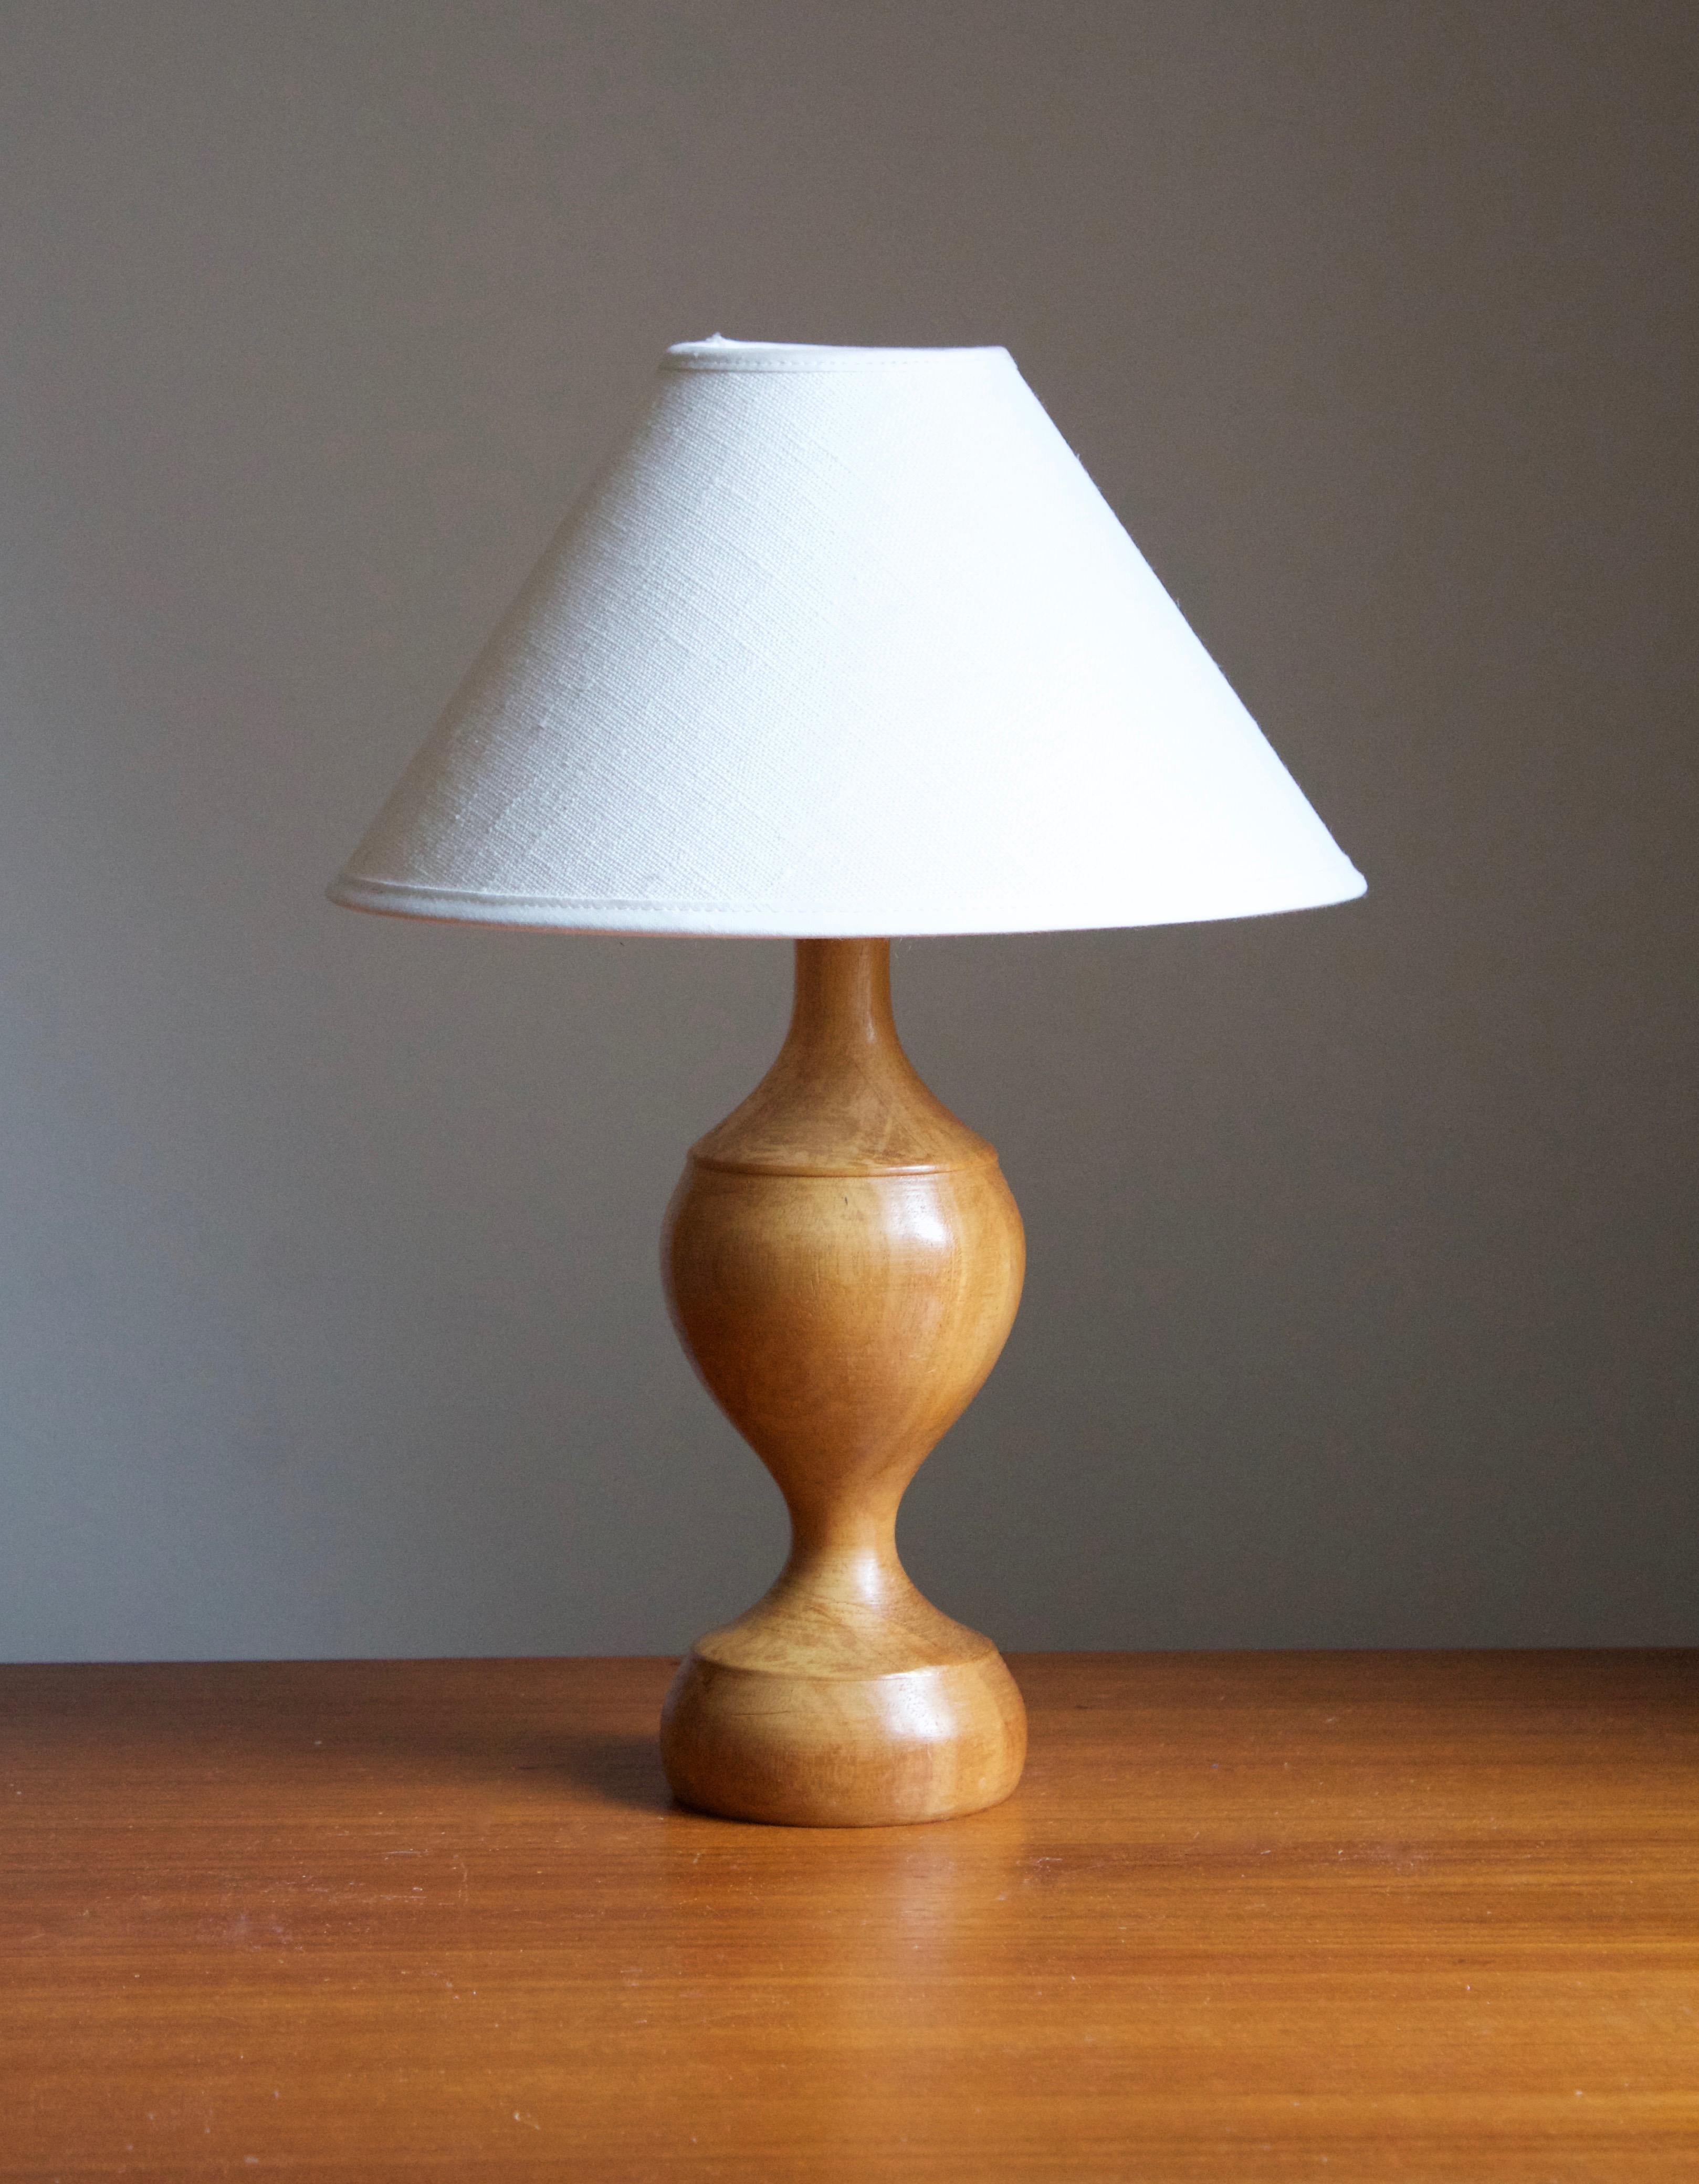 A table lamp designed and produced in Sweden, 1970s. In solid birch. 

Stated dimensions exclude lampshade. Height includes socket. Sold without lampshade.
